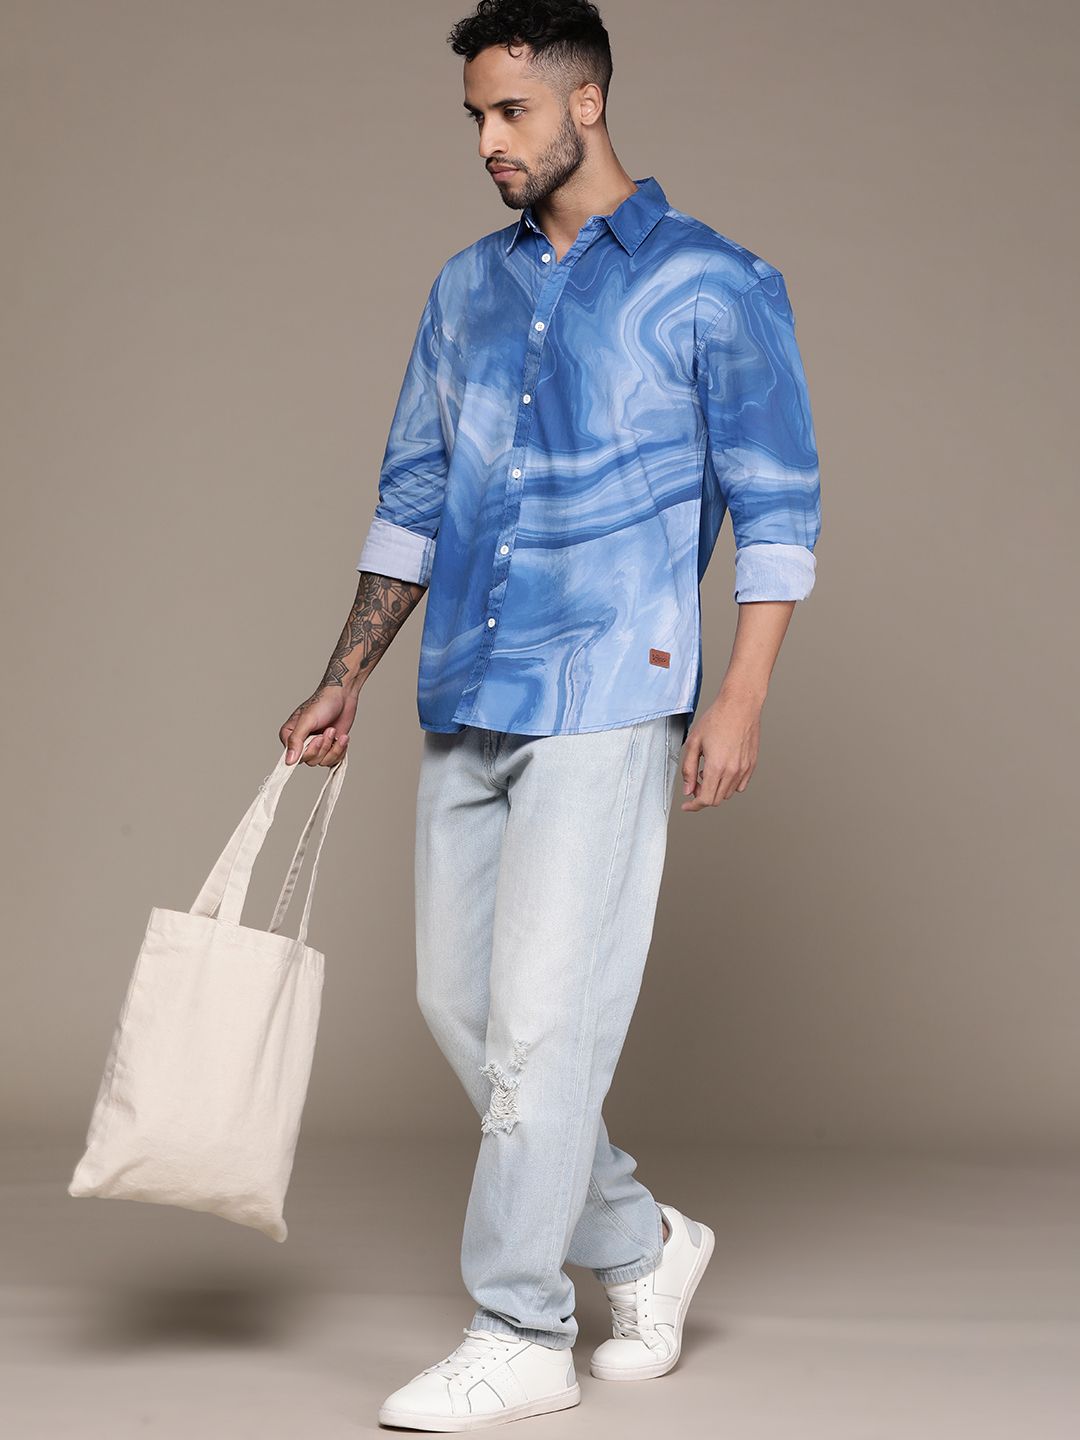 The Roadster Lifestyle Co. Marble Print Pure Cotton Relaxed Shirt